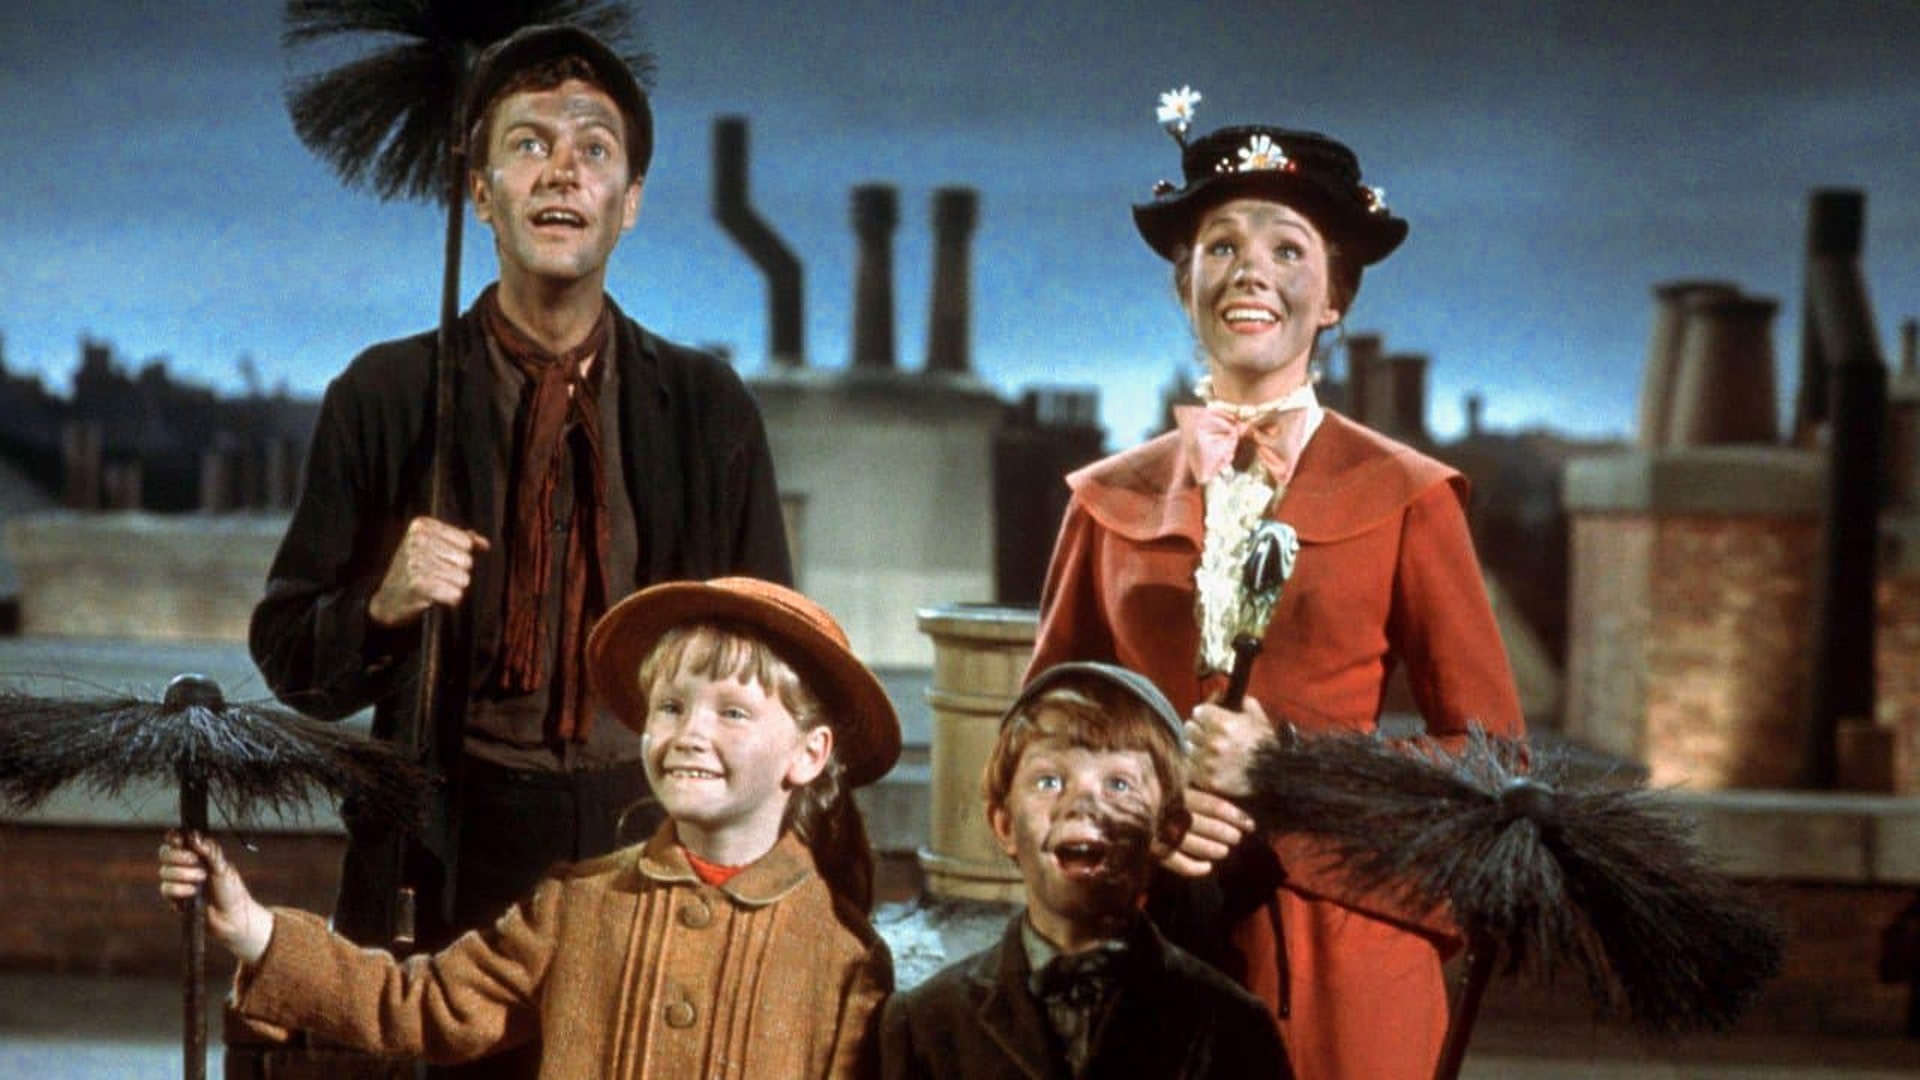 42 Mary Poppins (1964) Movie Facts You Haven't Read Before